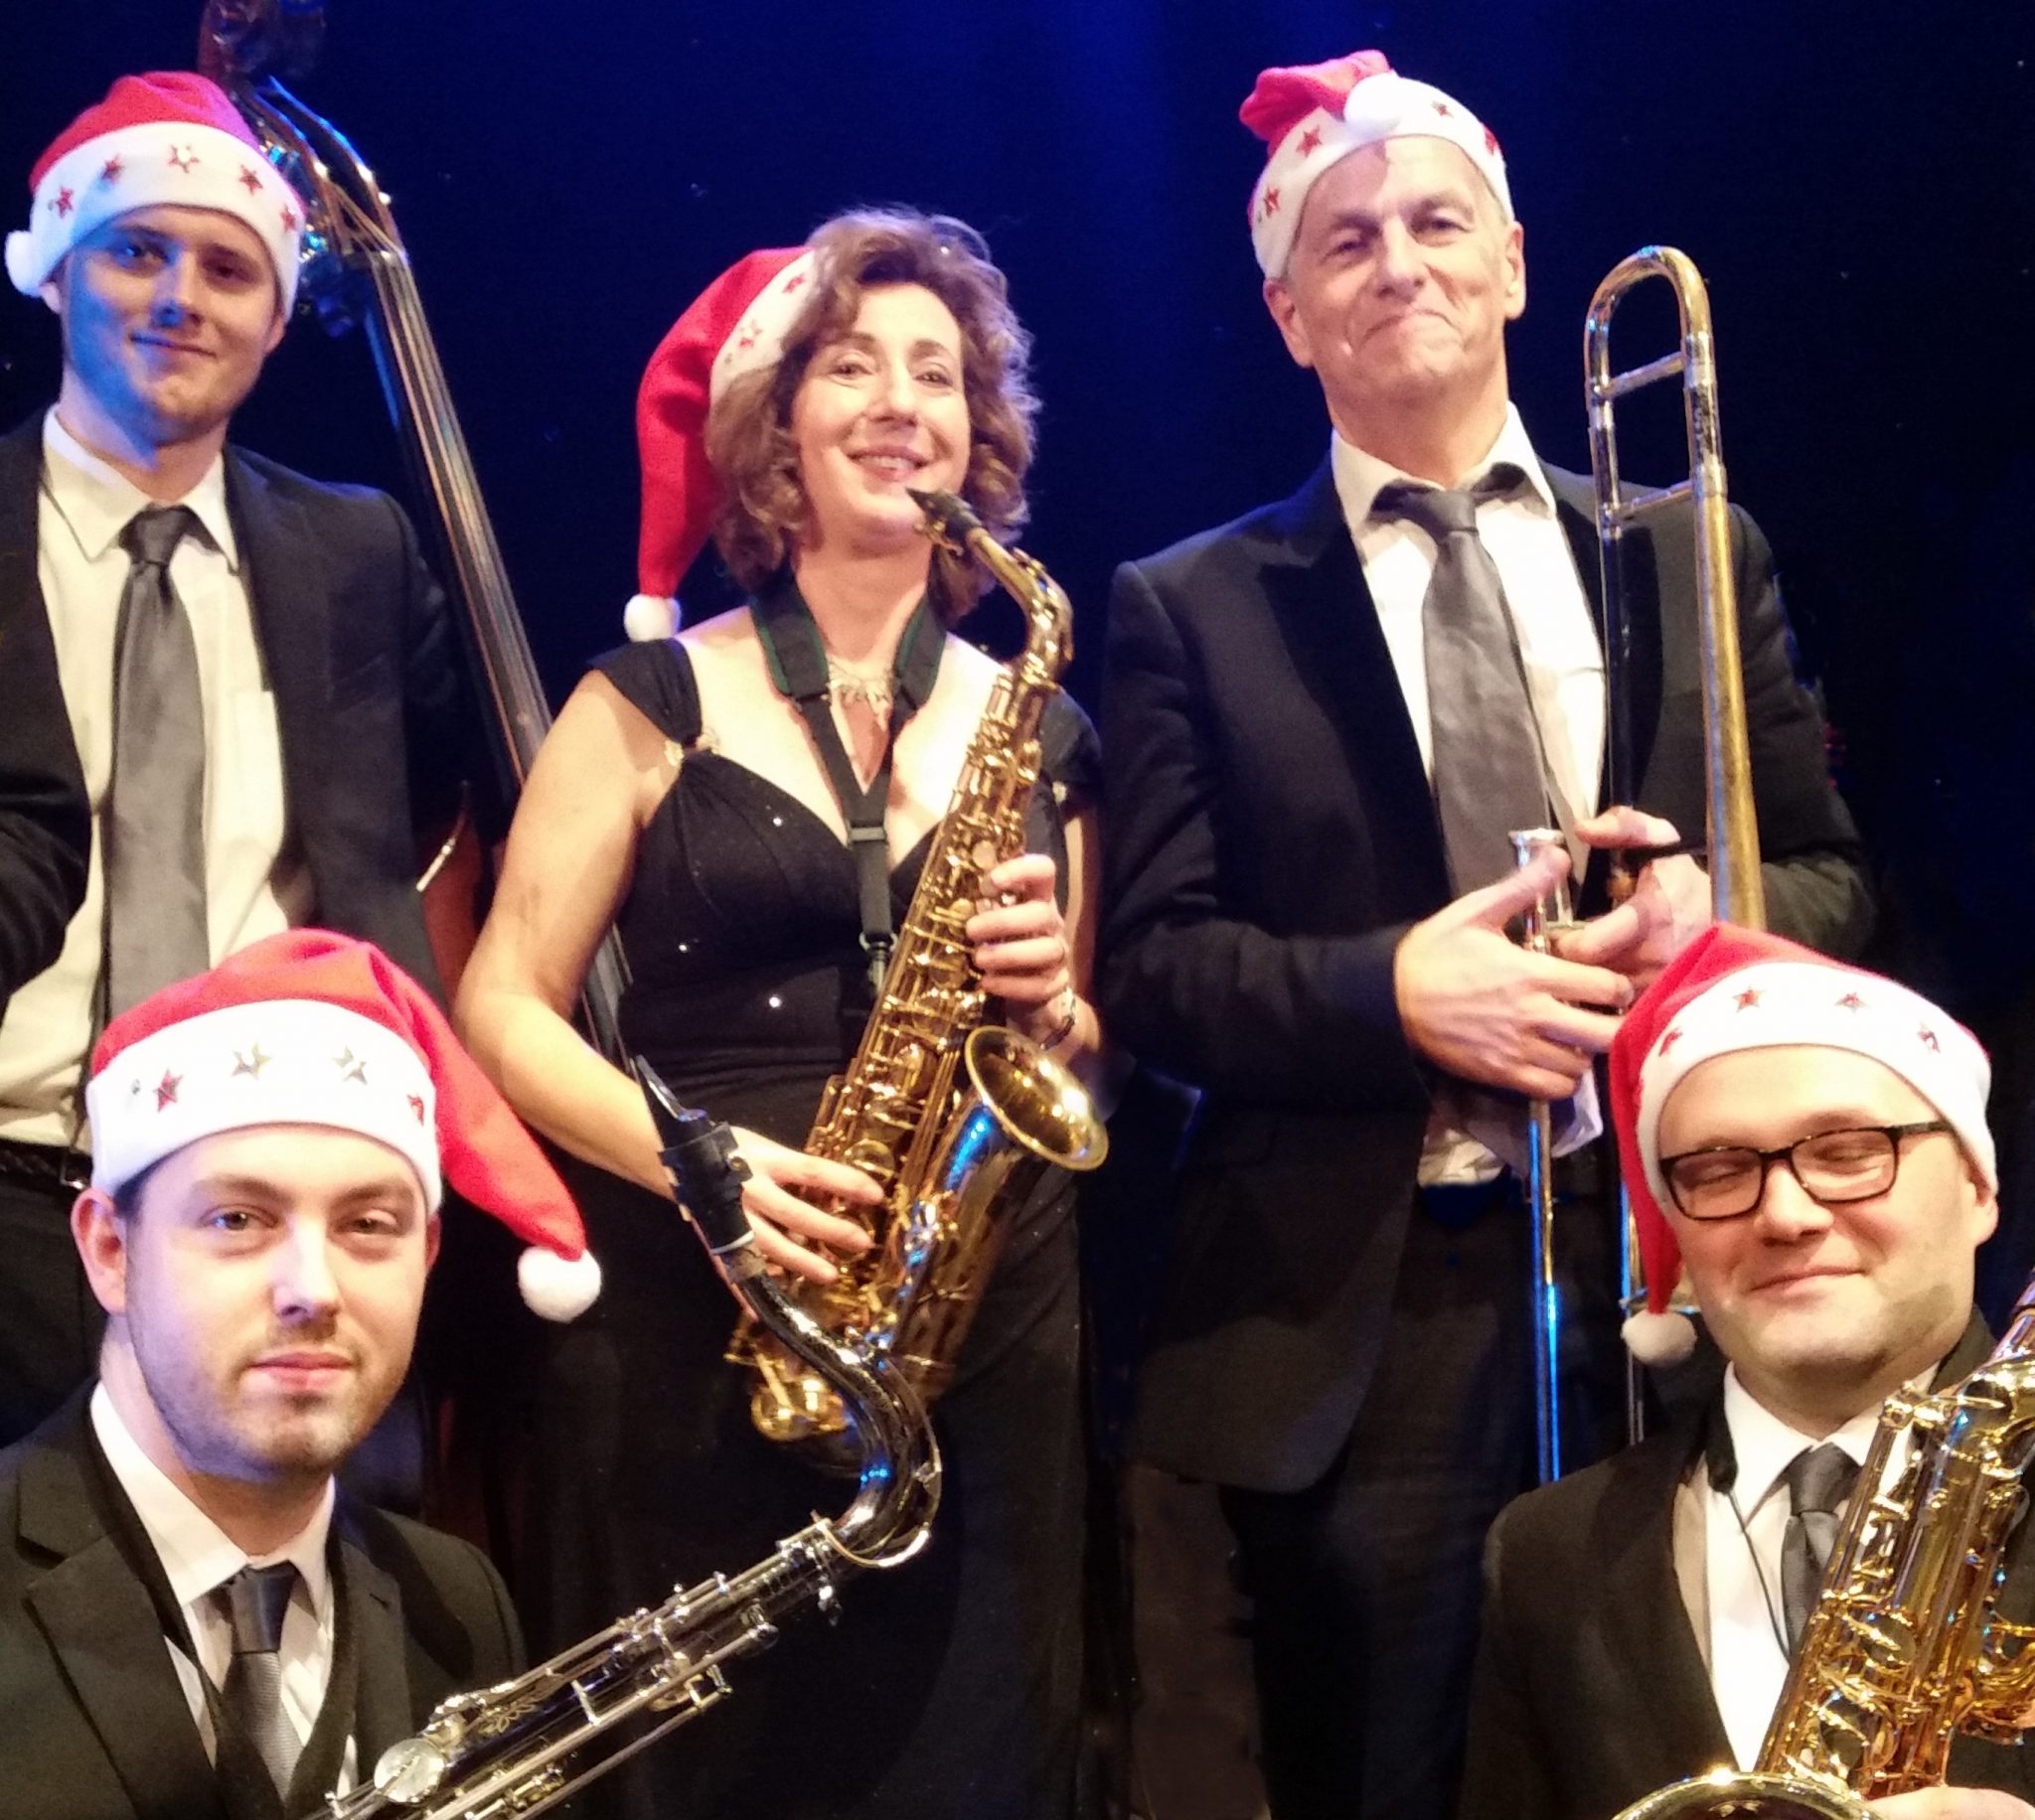 Fancy a ‘swinging’ Christmas with our jazz band? 🗓